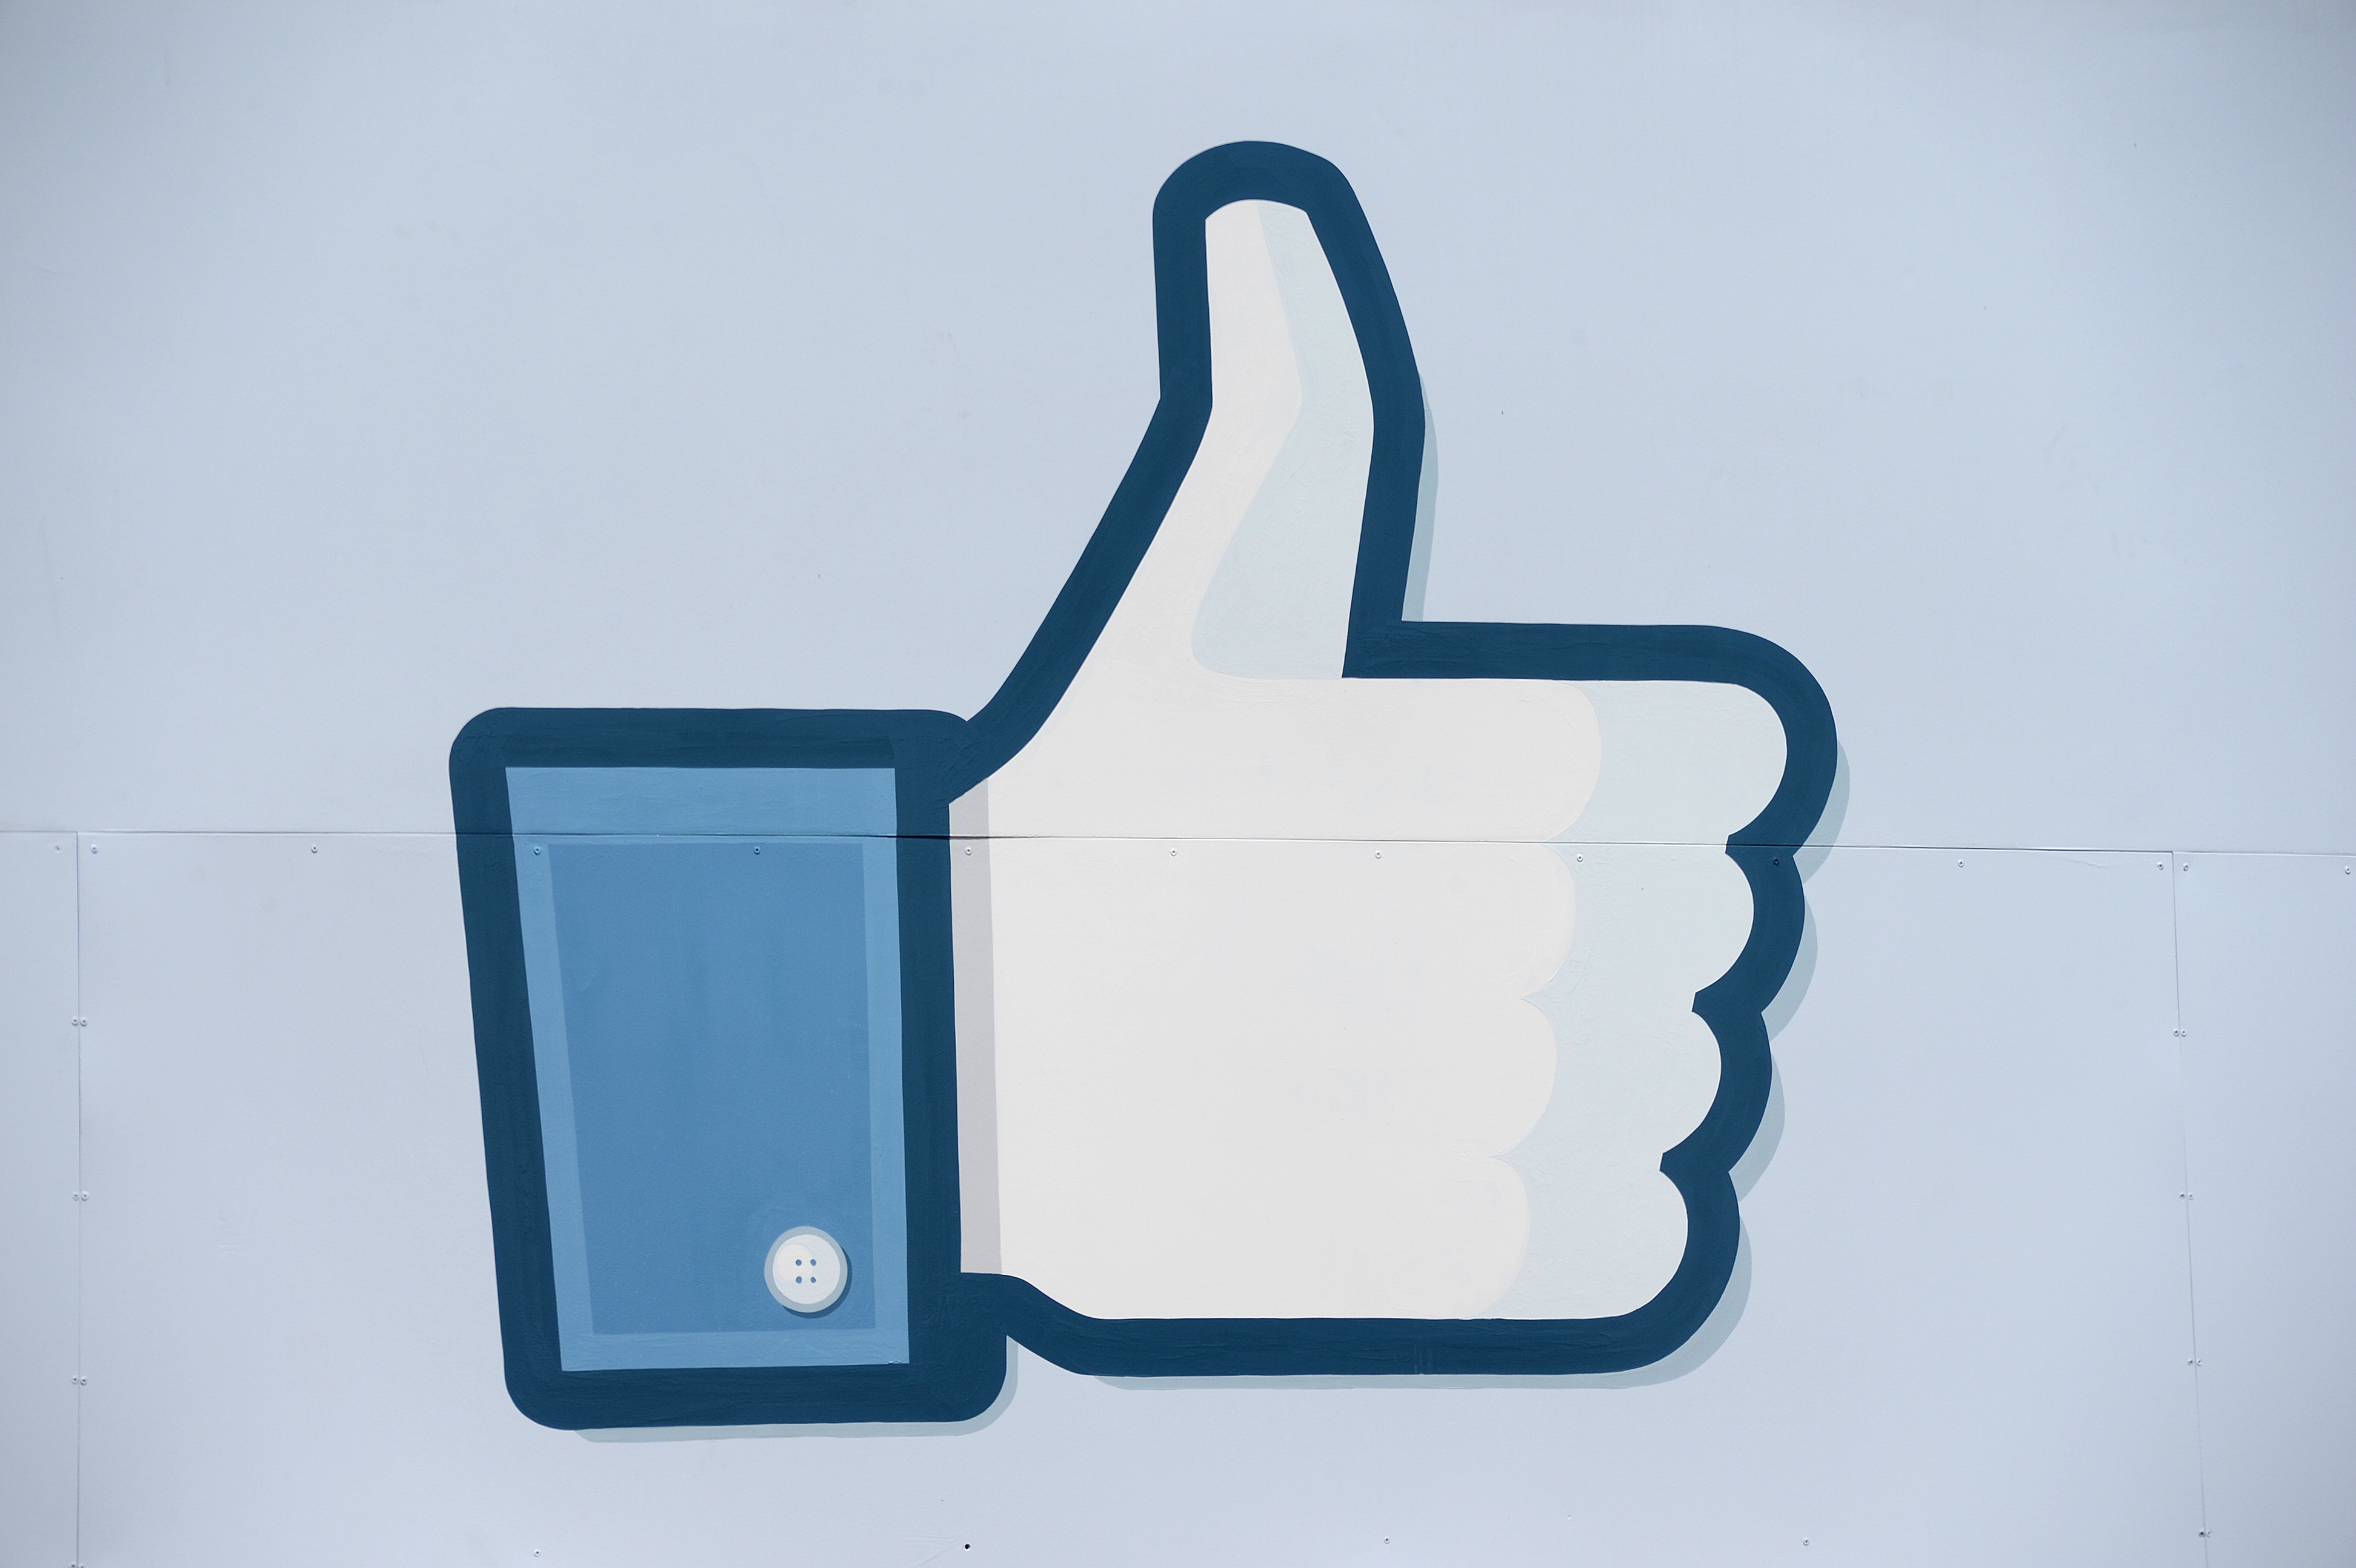 A thumbs up or "Like" icon at the Facebook main campus in Menlo Park, California, May 15, 2012. (Robyn Beck&mdash;AFP/Getty Images)